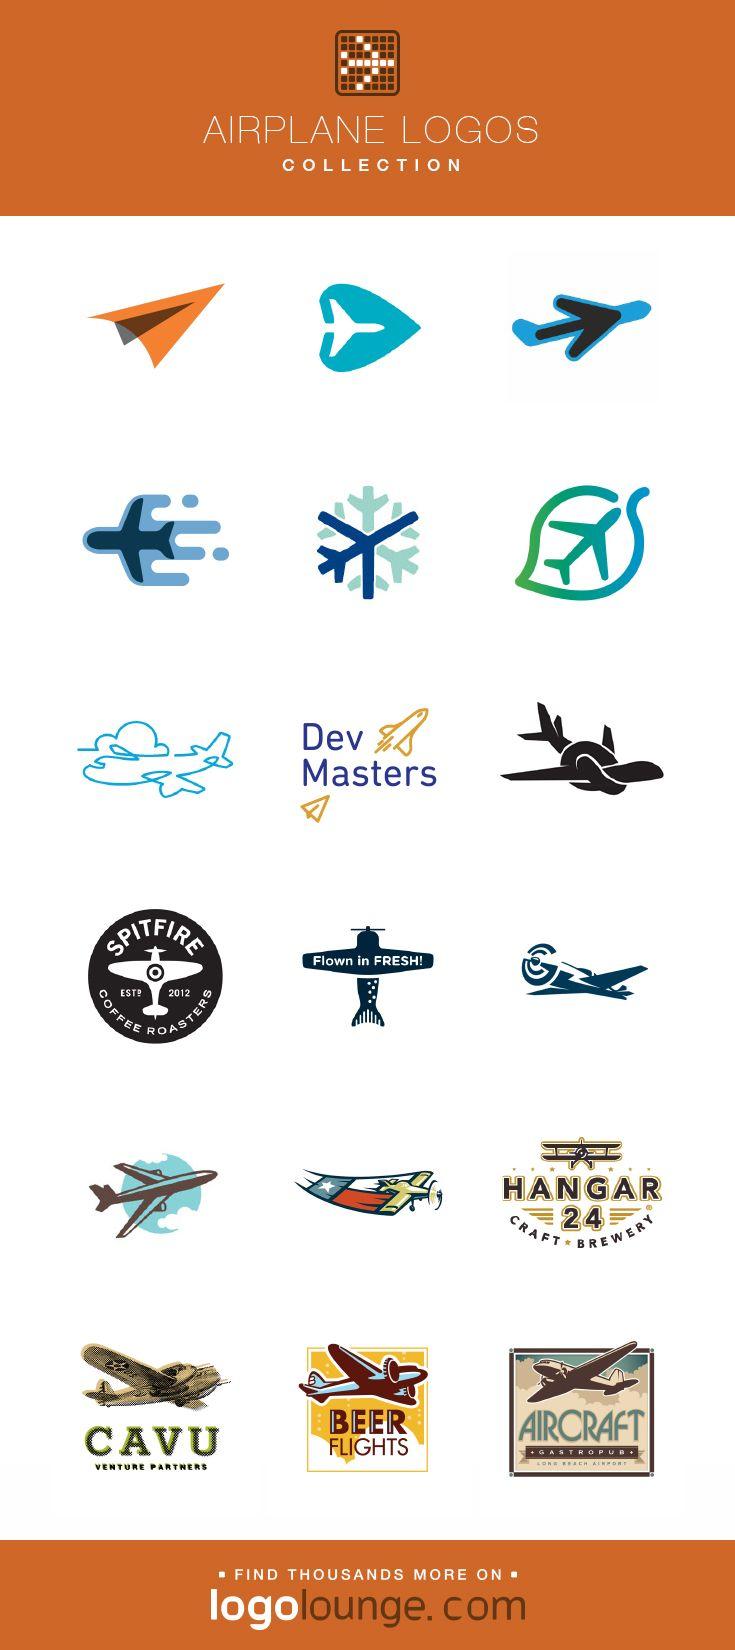 Best Known for Its Airplanes Logo - Logo Collections : Airplane vector logo design. Plane, wings, air